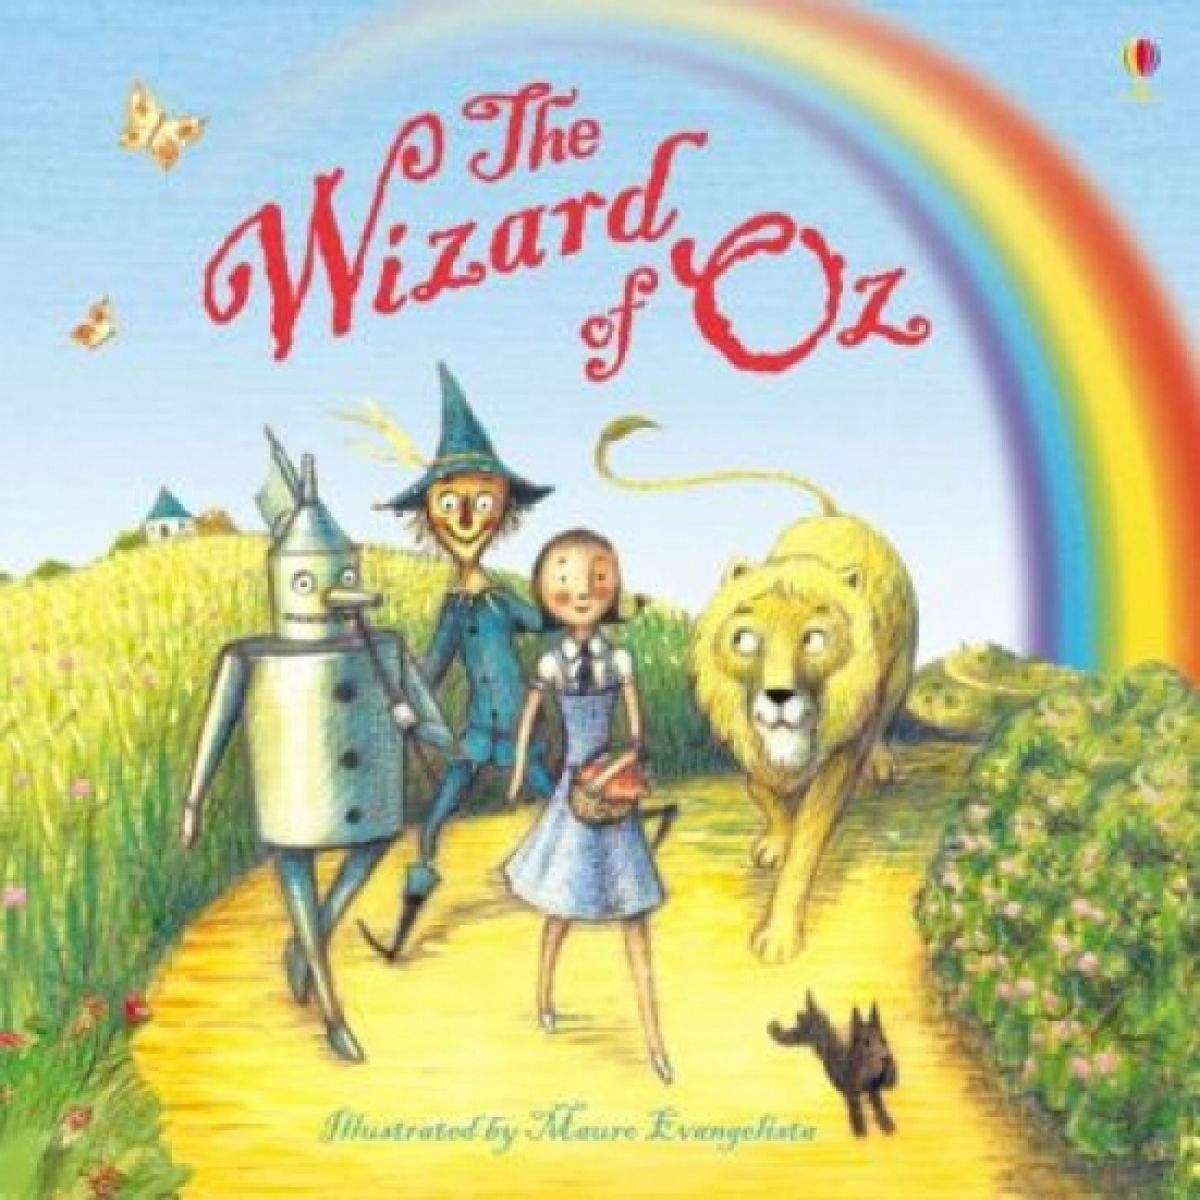 Sims Lesley Usborne Picture Books The Wizard of Oz 